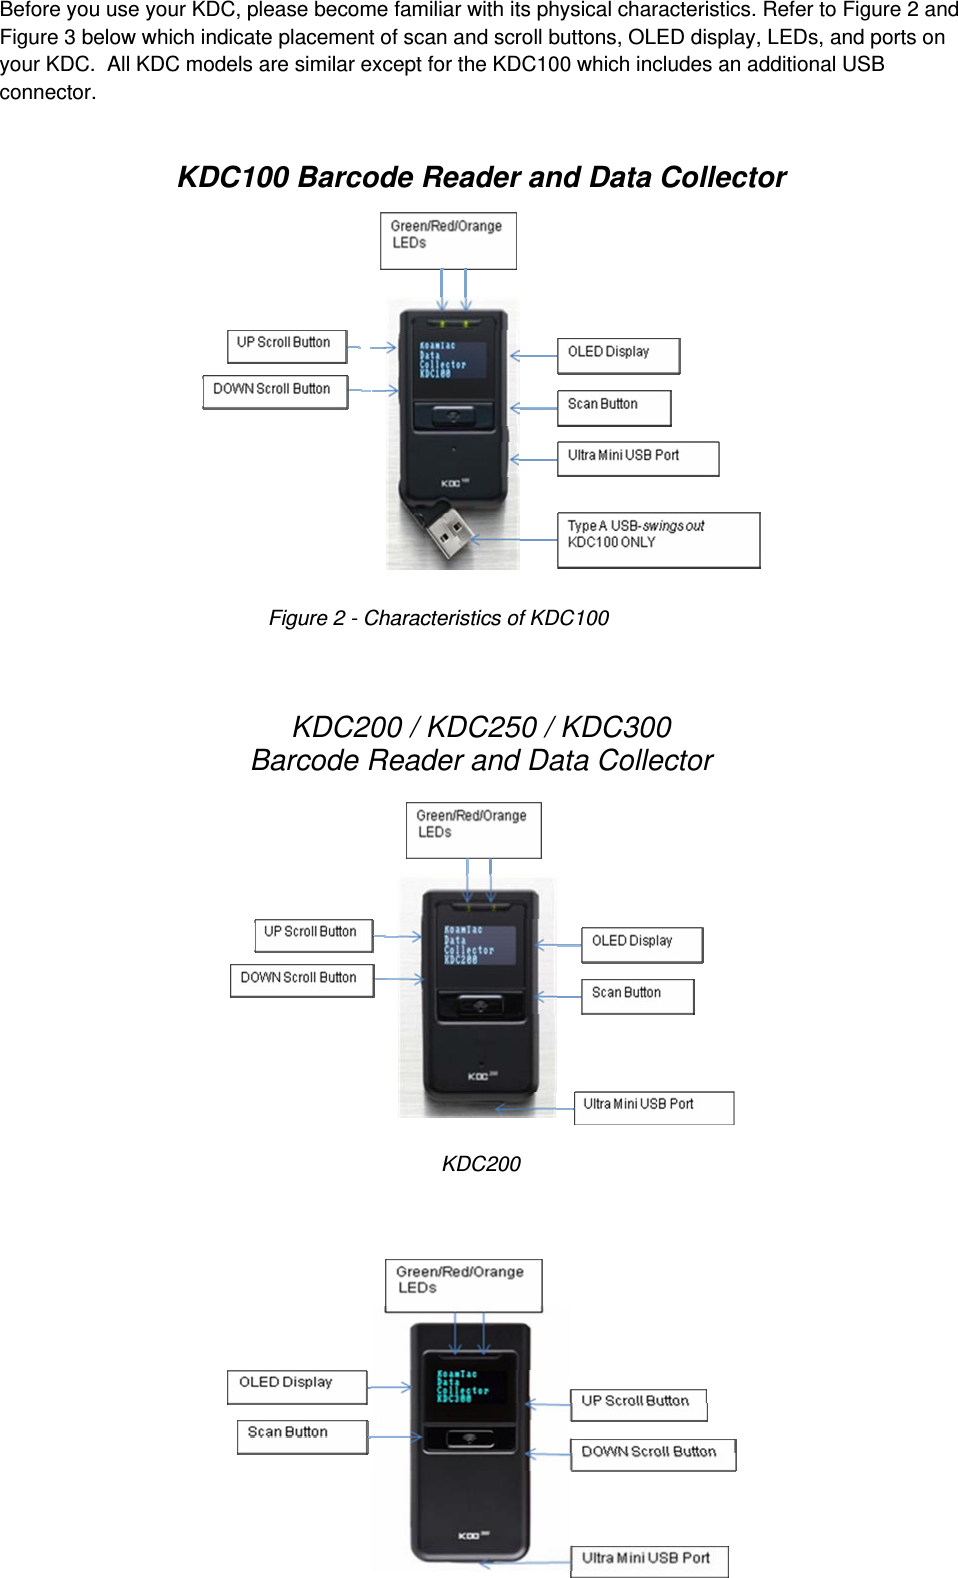 Before you use your KDC, please become familiar with its physical characteristics. Refer to Figure 2 and Figure 3 below which indicate placement of scan and scroll buttons, OLED display, LEDs, and ports on your KDC.  All KDC models are similar except for the KDC100 which includes an additional USB connector.  KDC100 Barcode Reader and Data Collector     KDC200 / KDC250 / KDC300 Barcode Reader and Data Collector         KDC200     Figure 2 - Characteristics of KDC100 